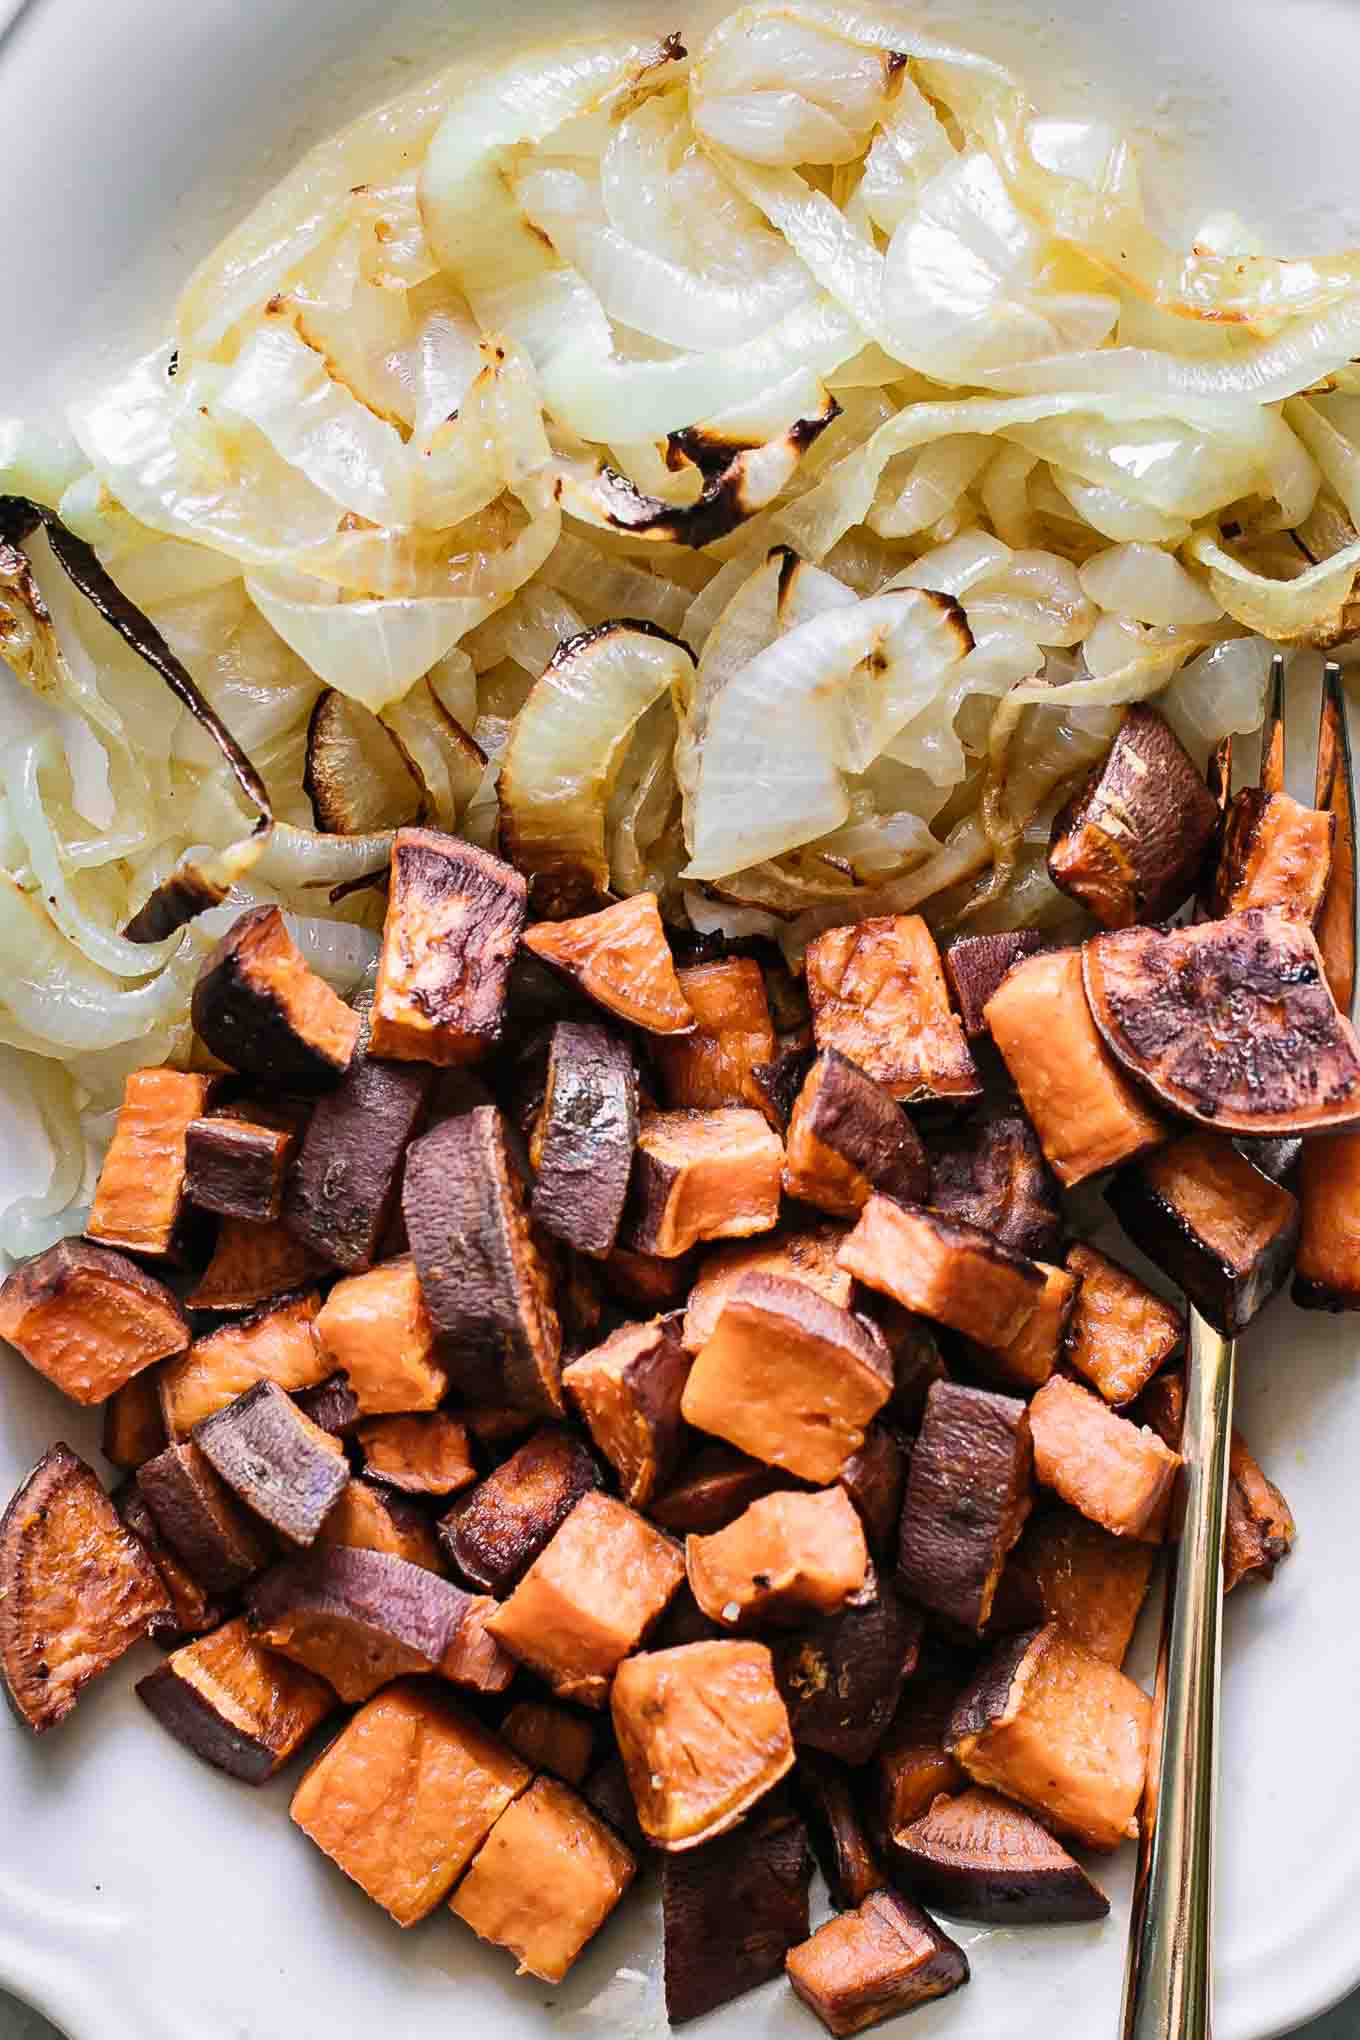 baked onions and sweet potatoes on a white plate